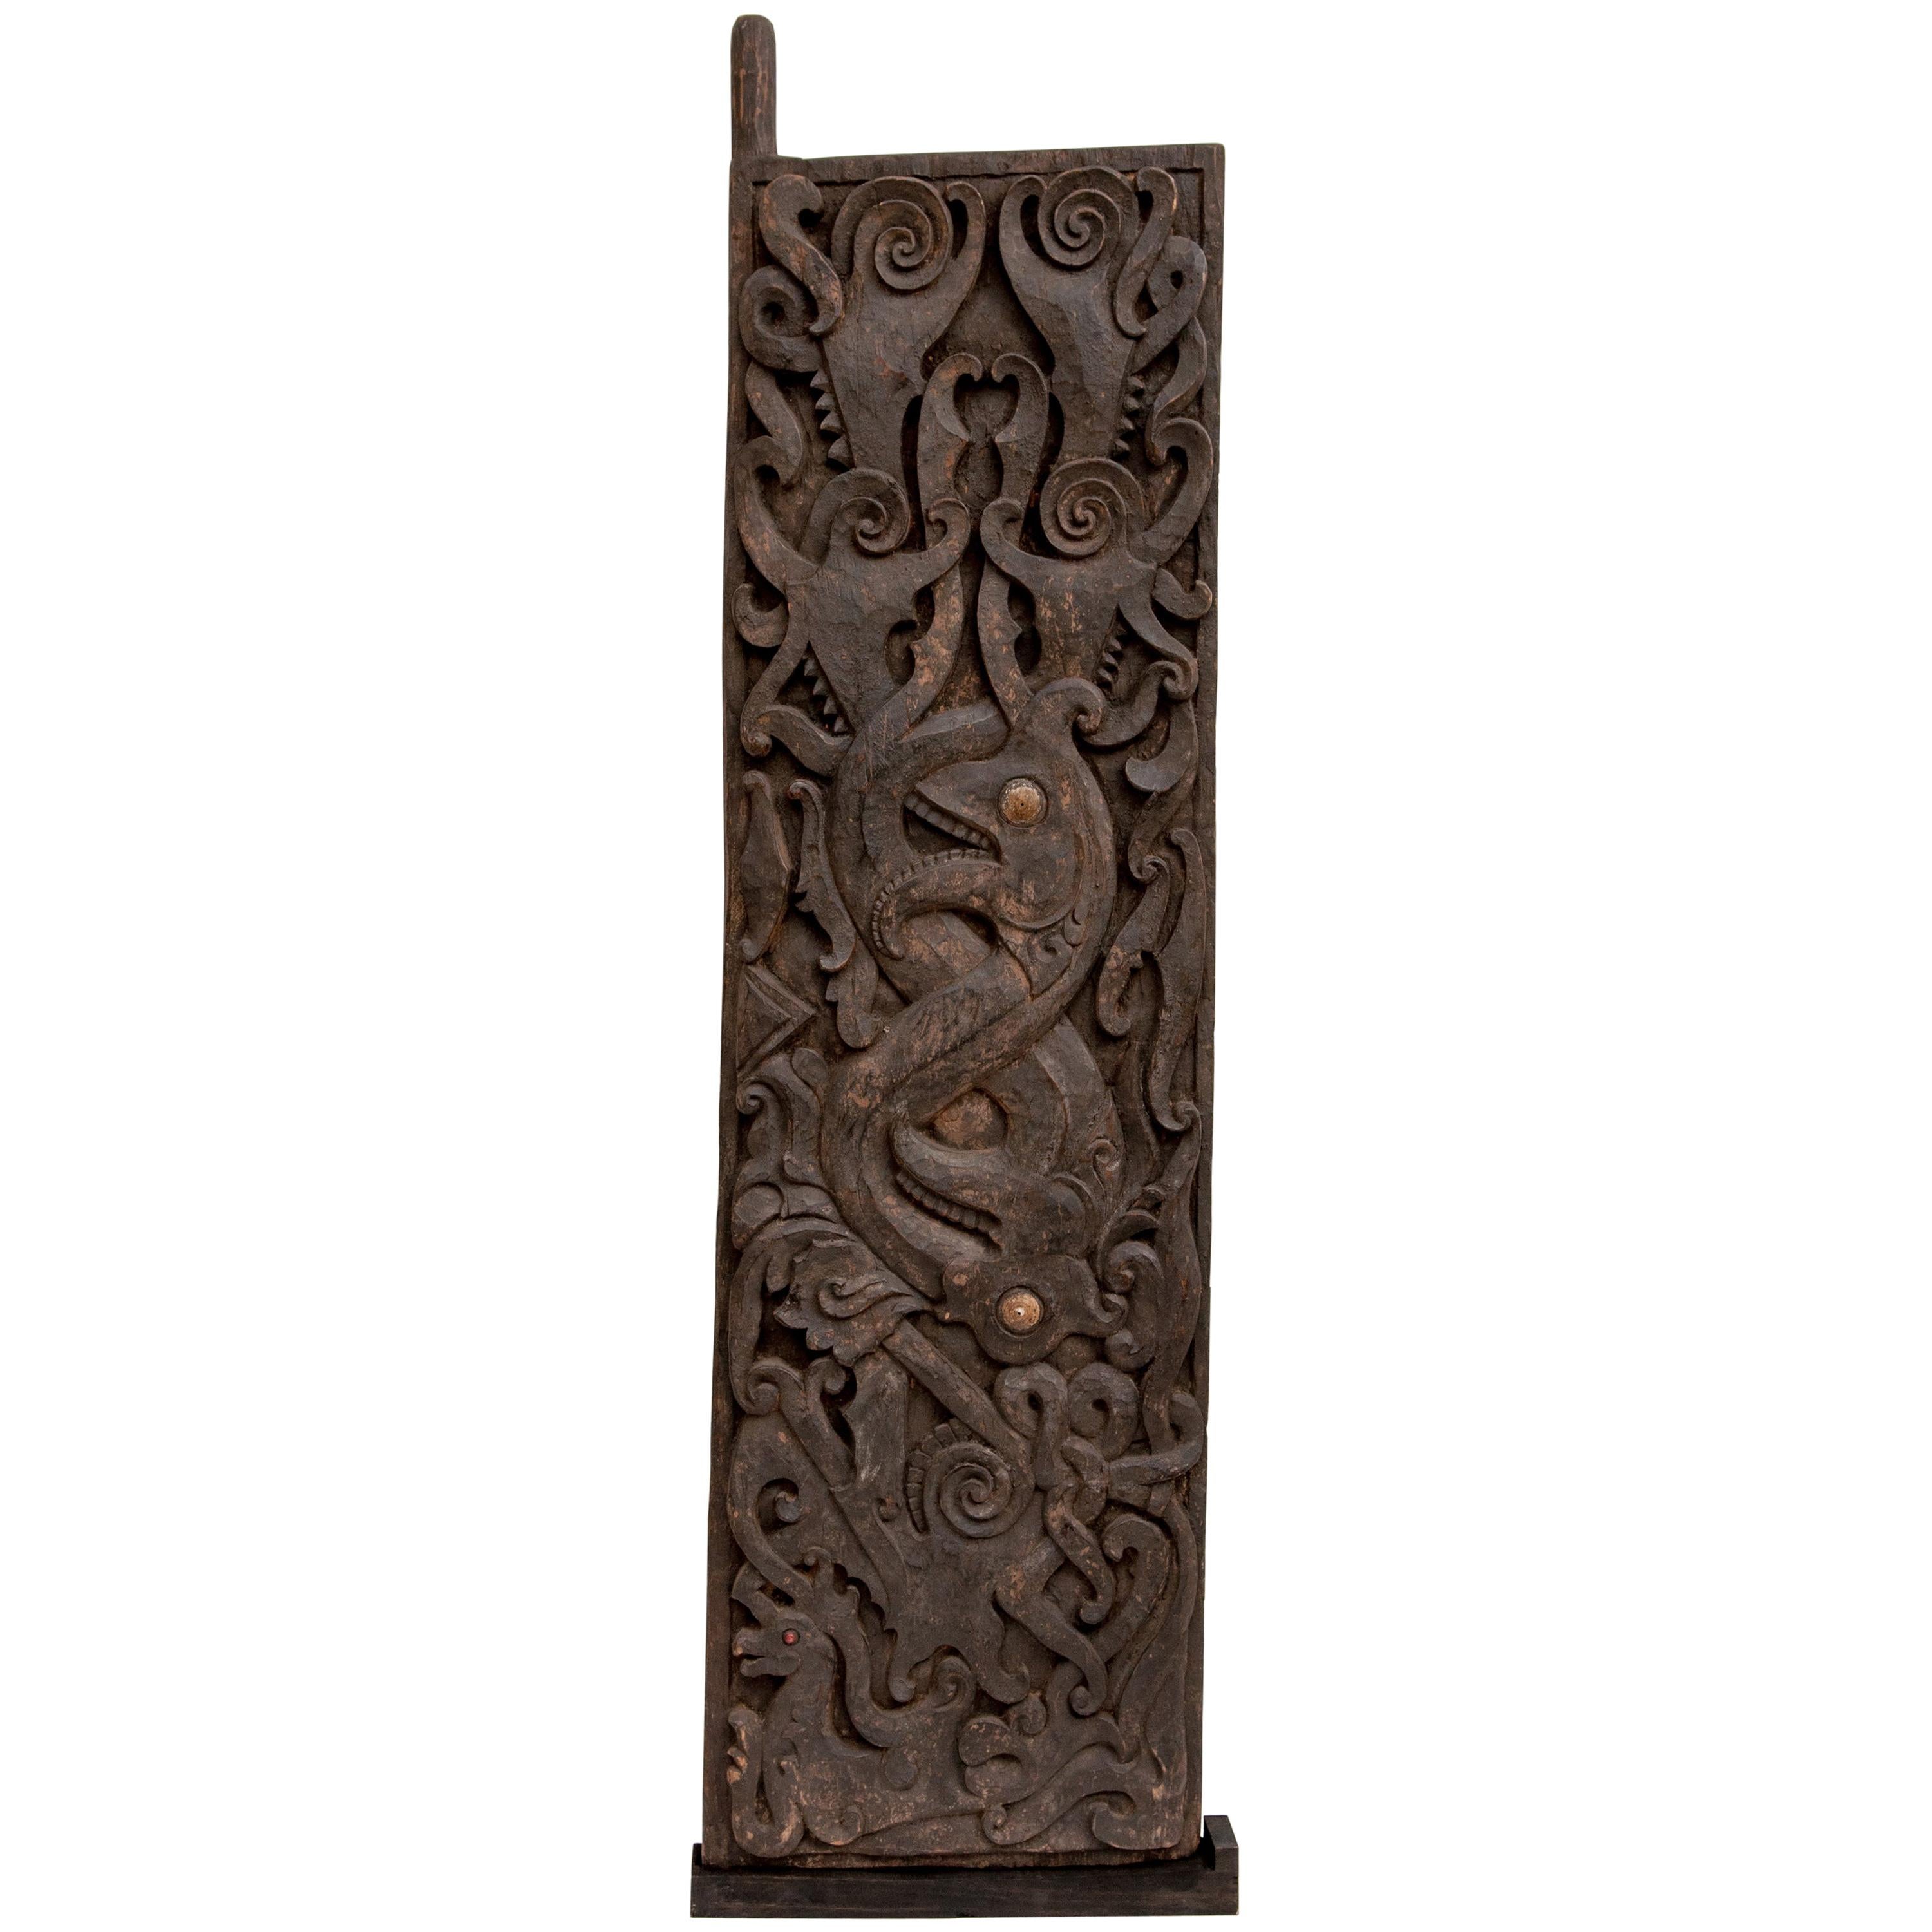 Carved Tribal Door Panel, Dayak of Borneo, Indonesia, Early to Mid-20th Century